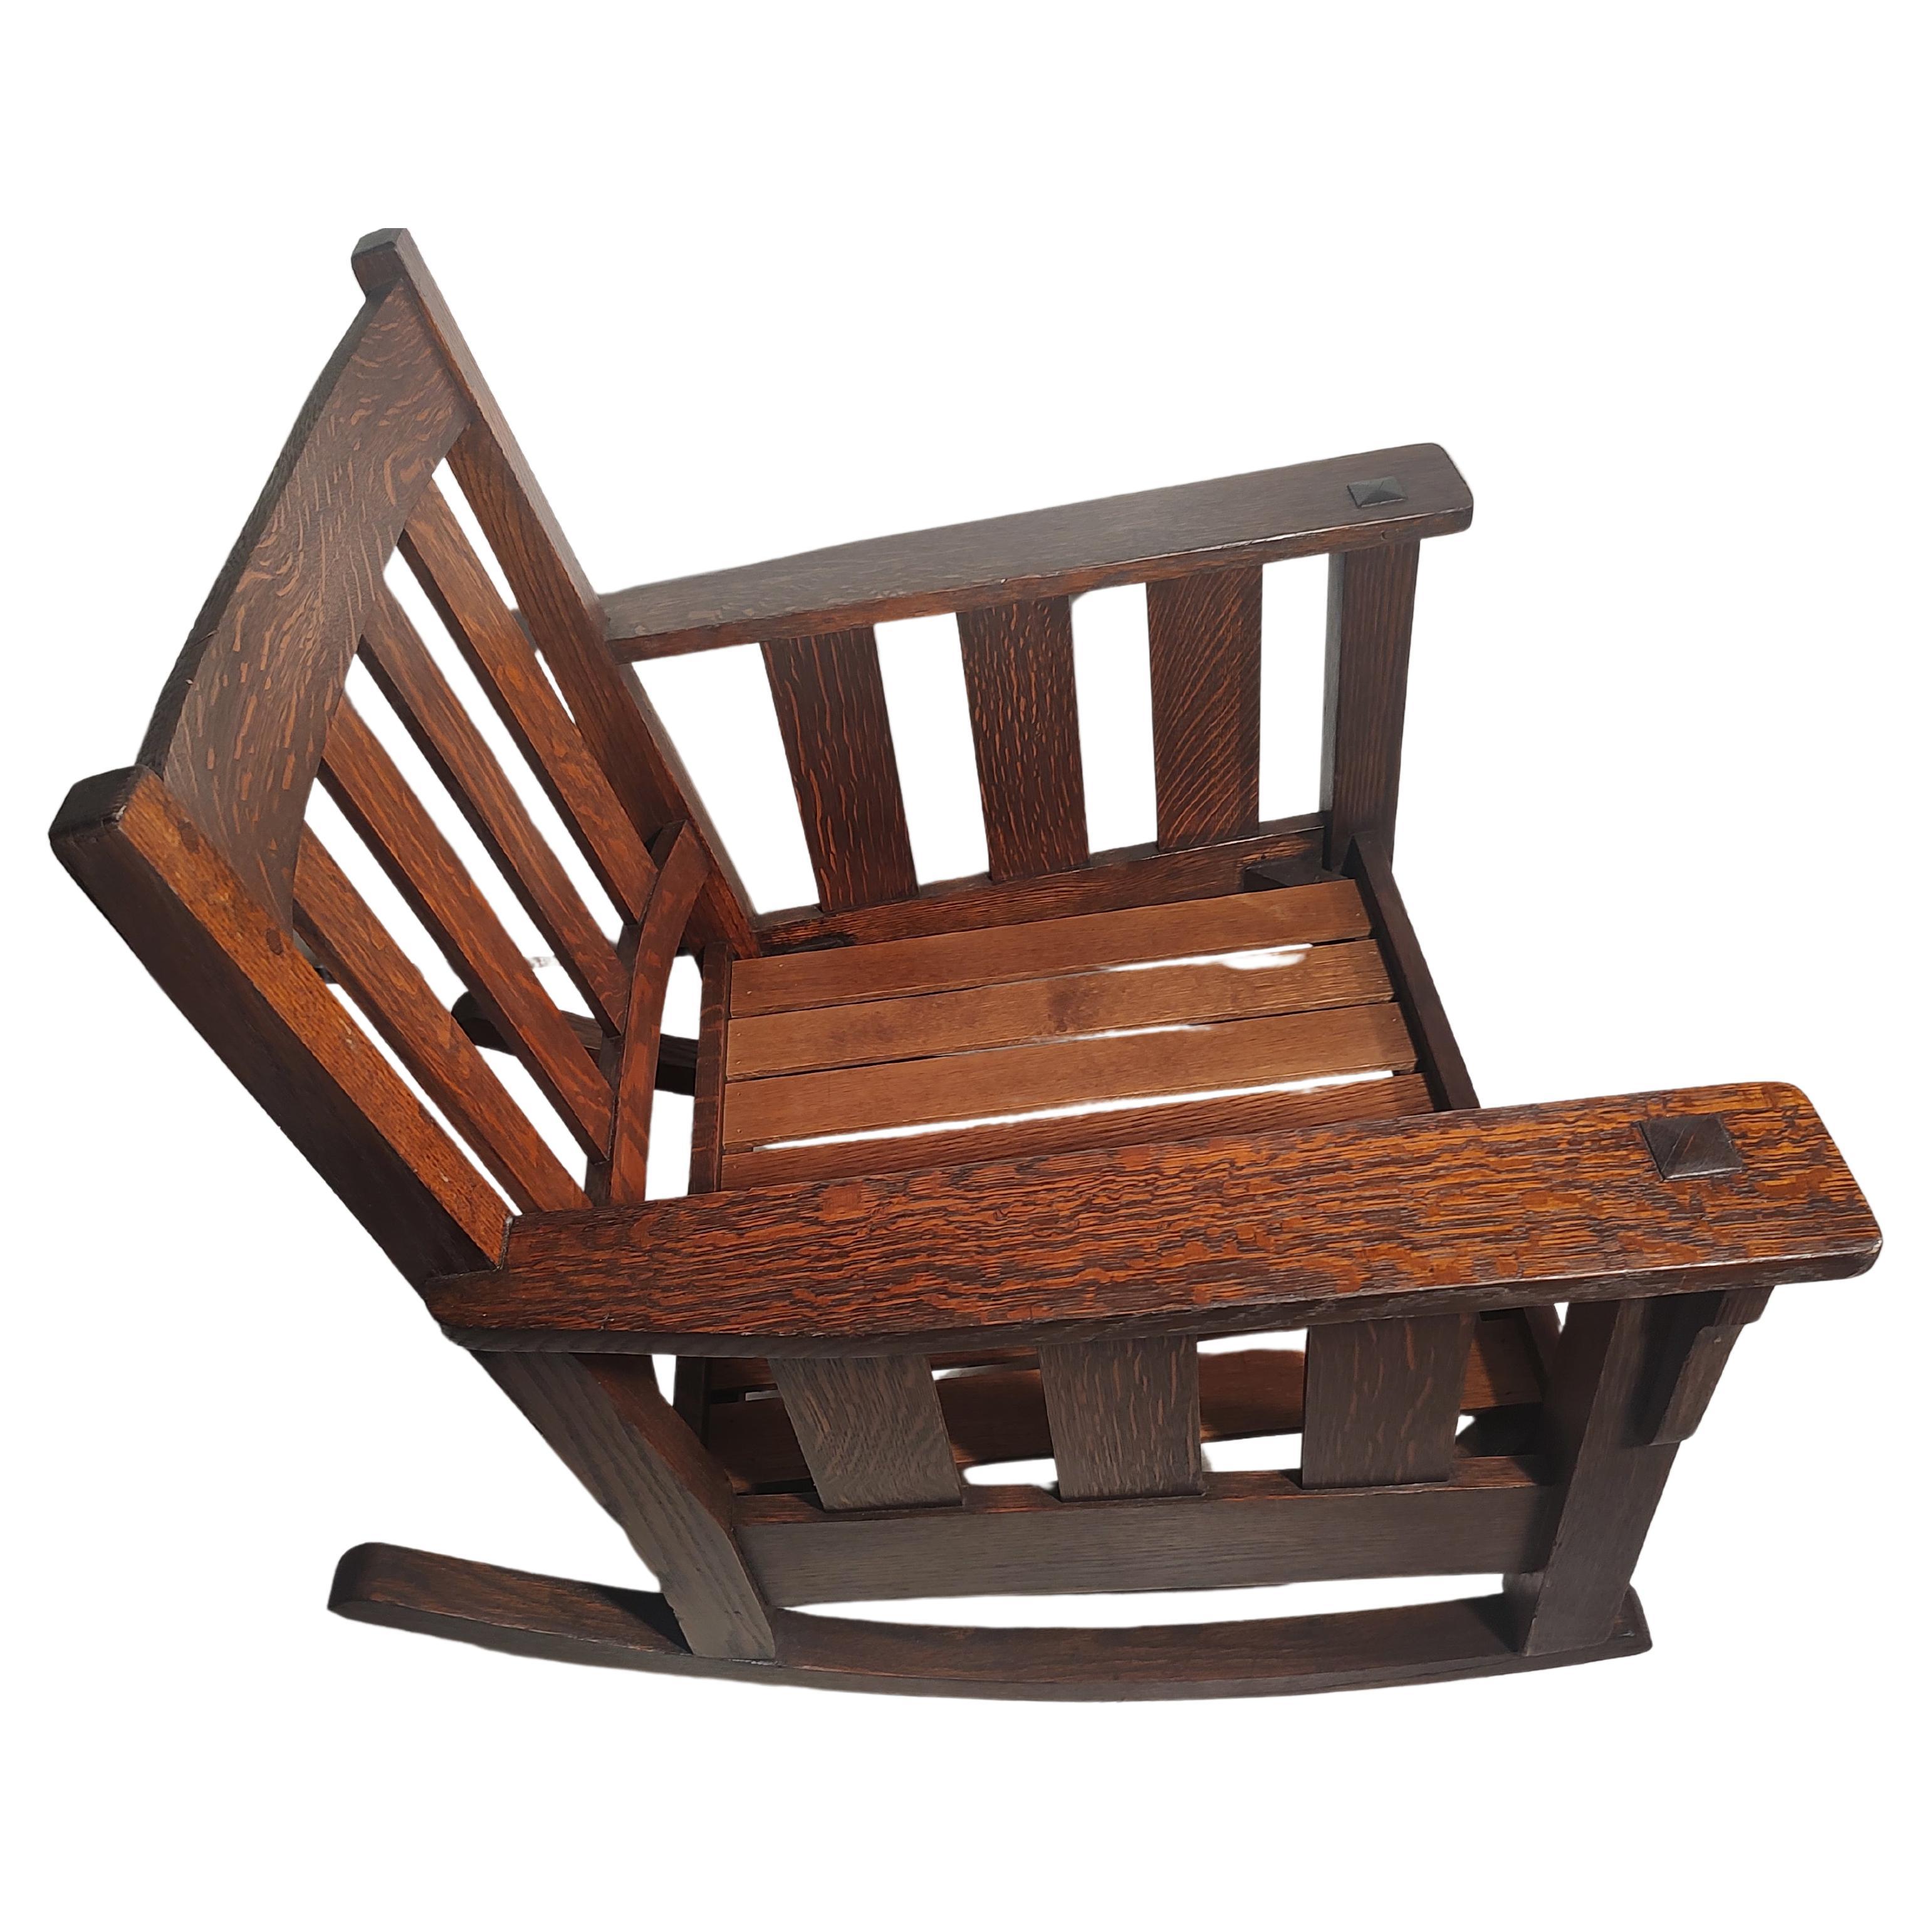 American Arts & Crafts Mission Oak Slatted Rocking Chair attributed to Stickley Brothers  For Sale